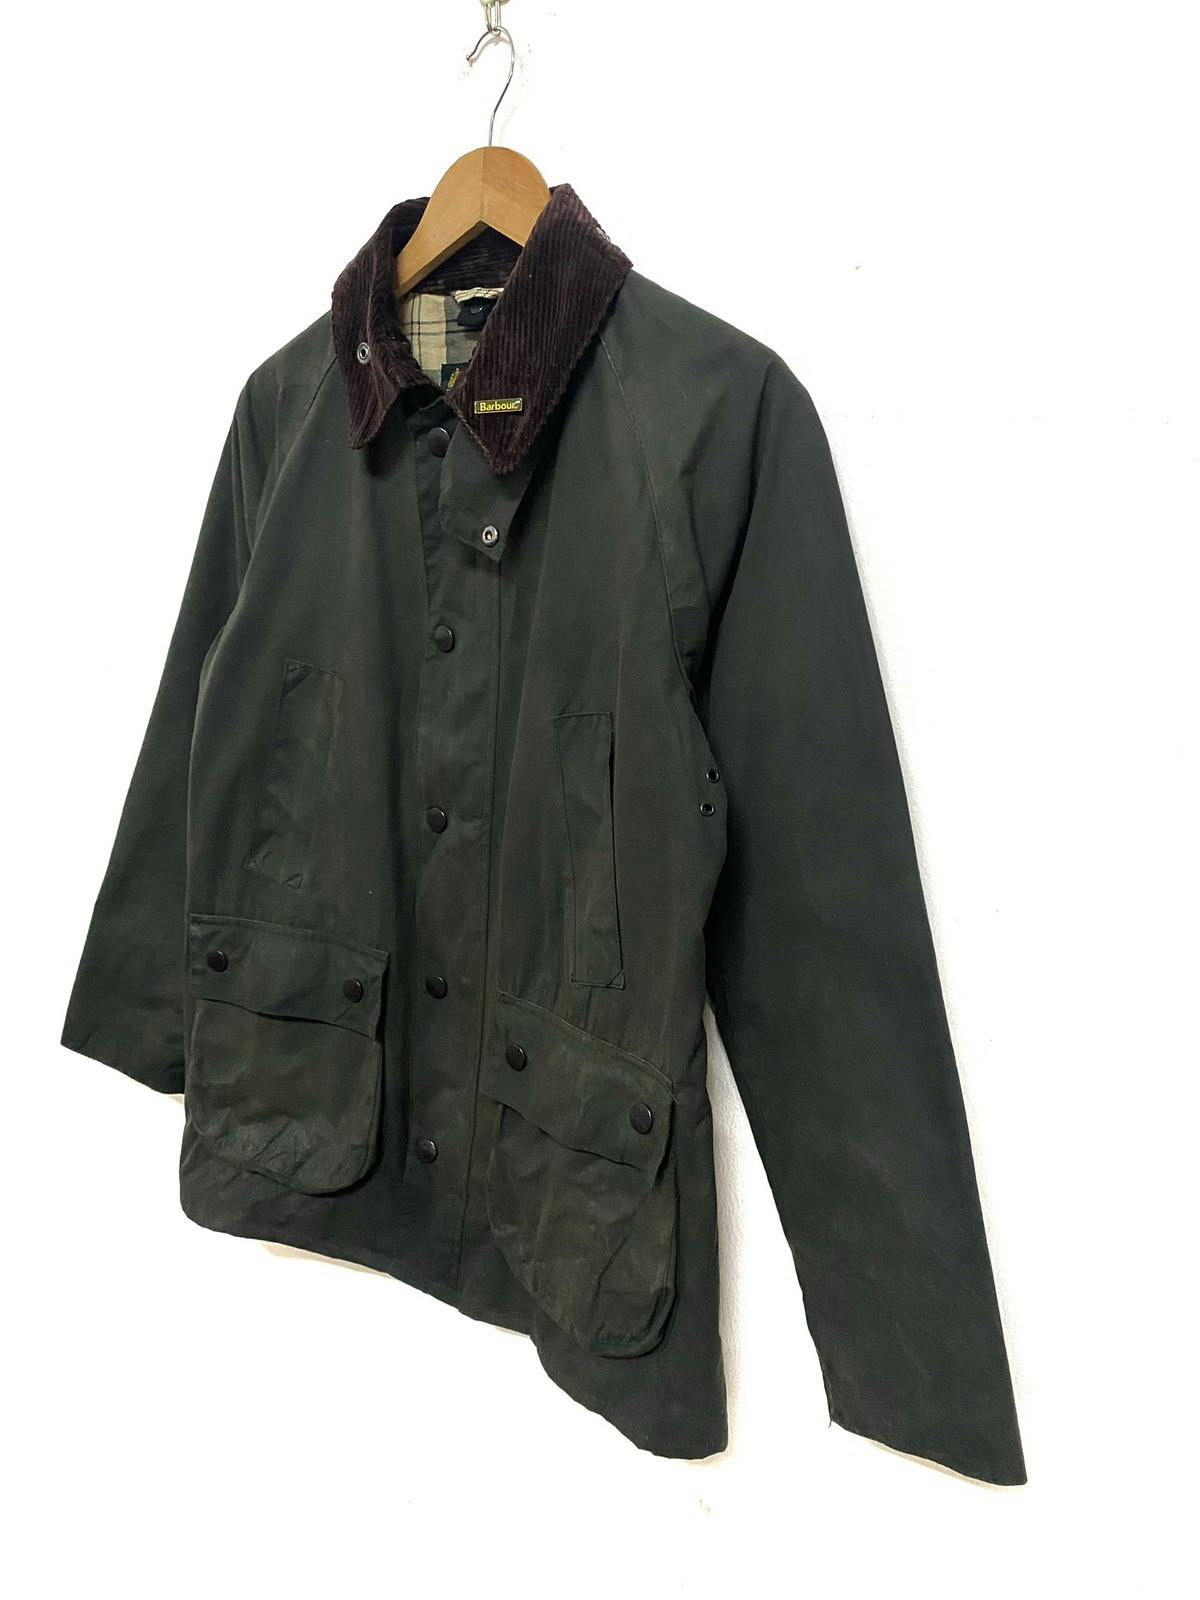 Barbour Classic Bedale AW19 Wax Jacket Made in England - 6